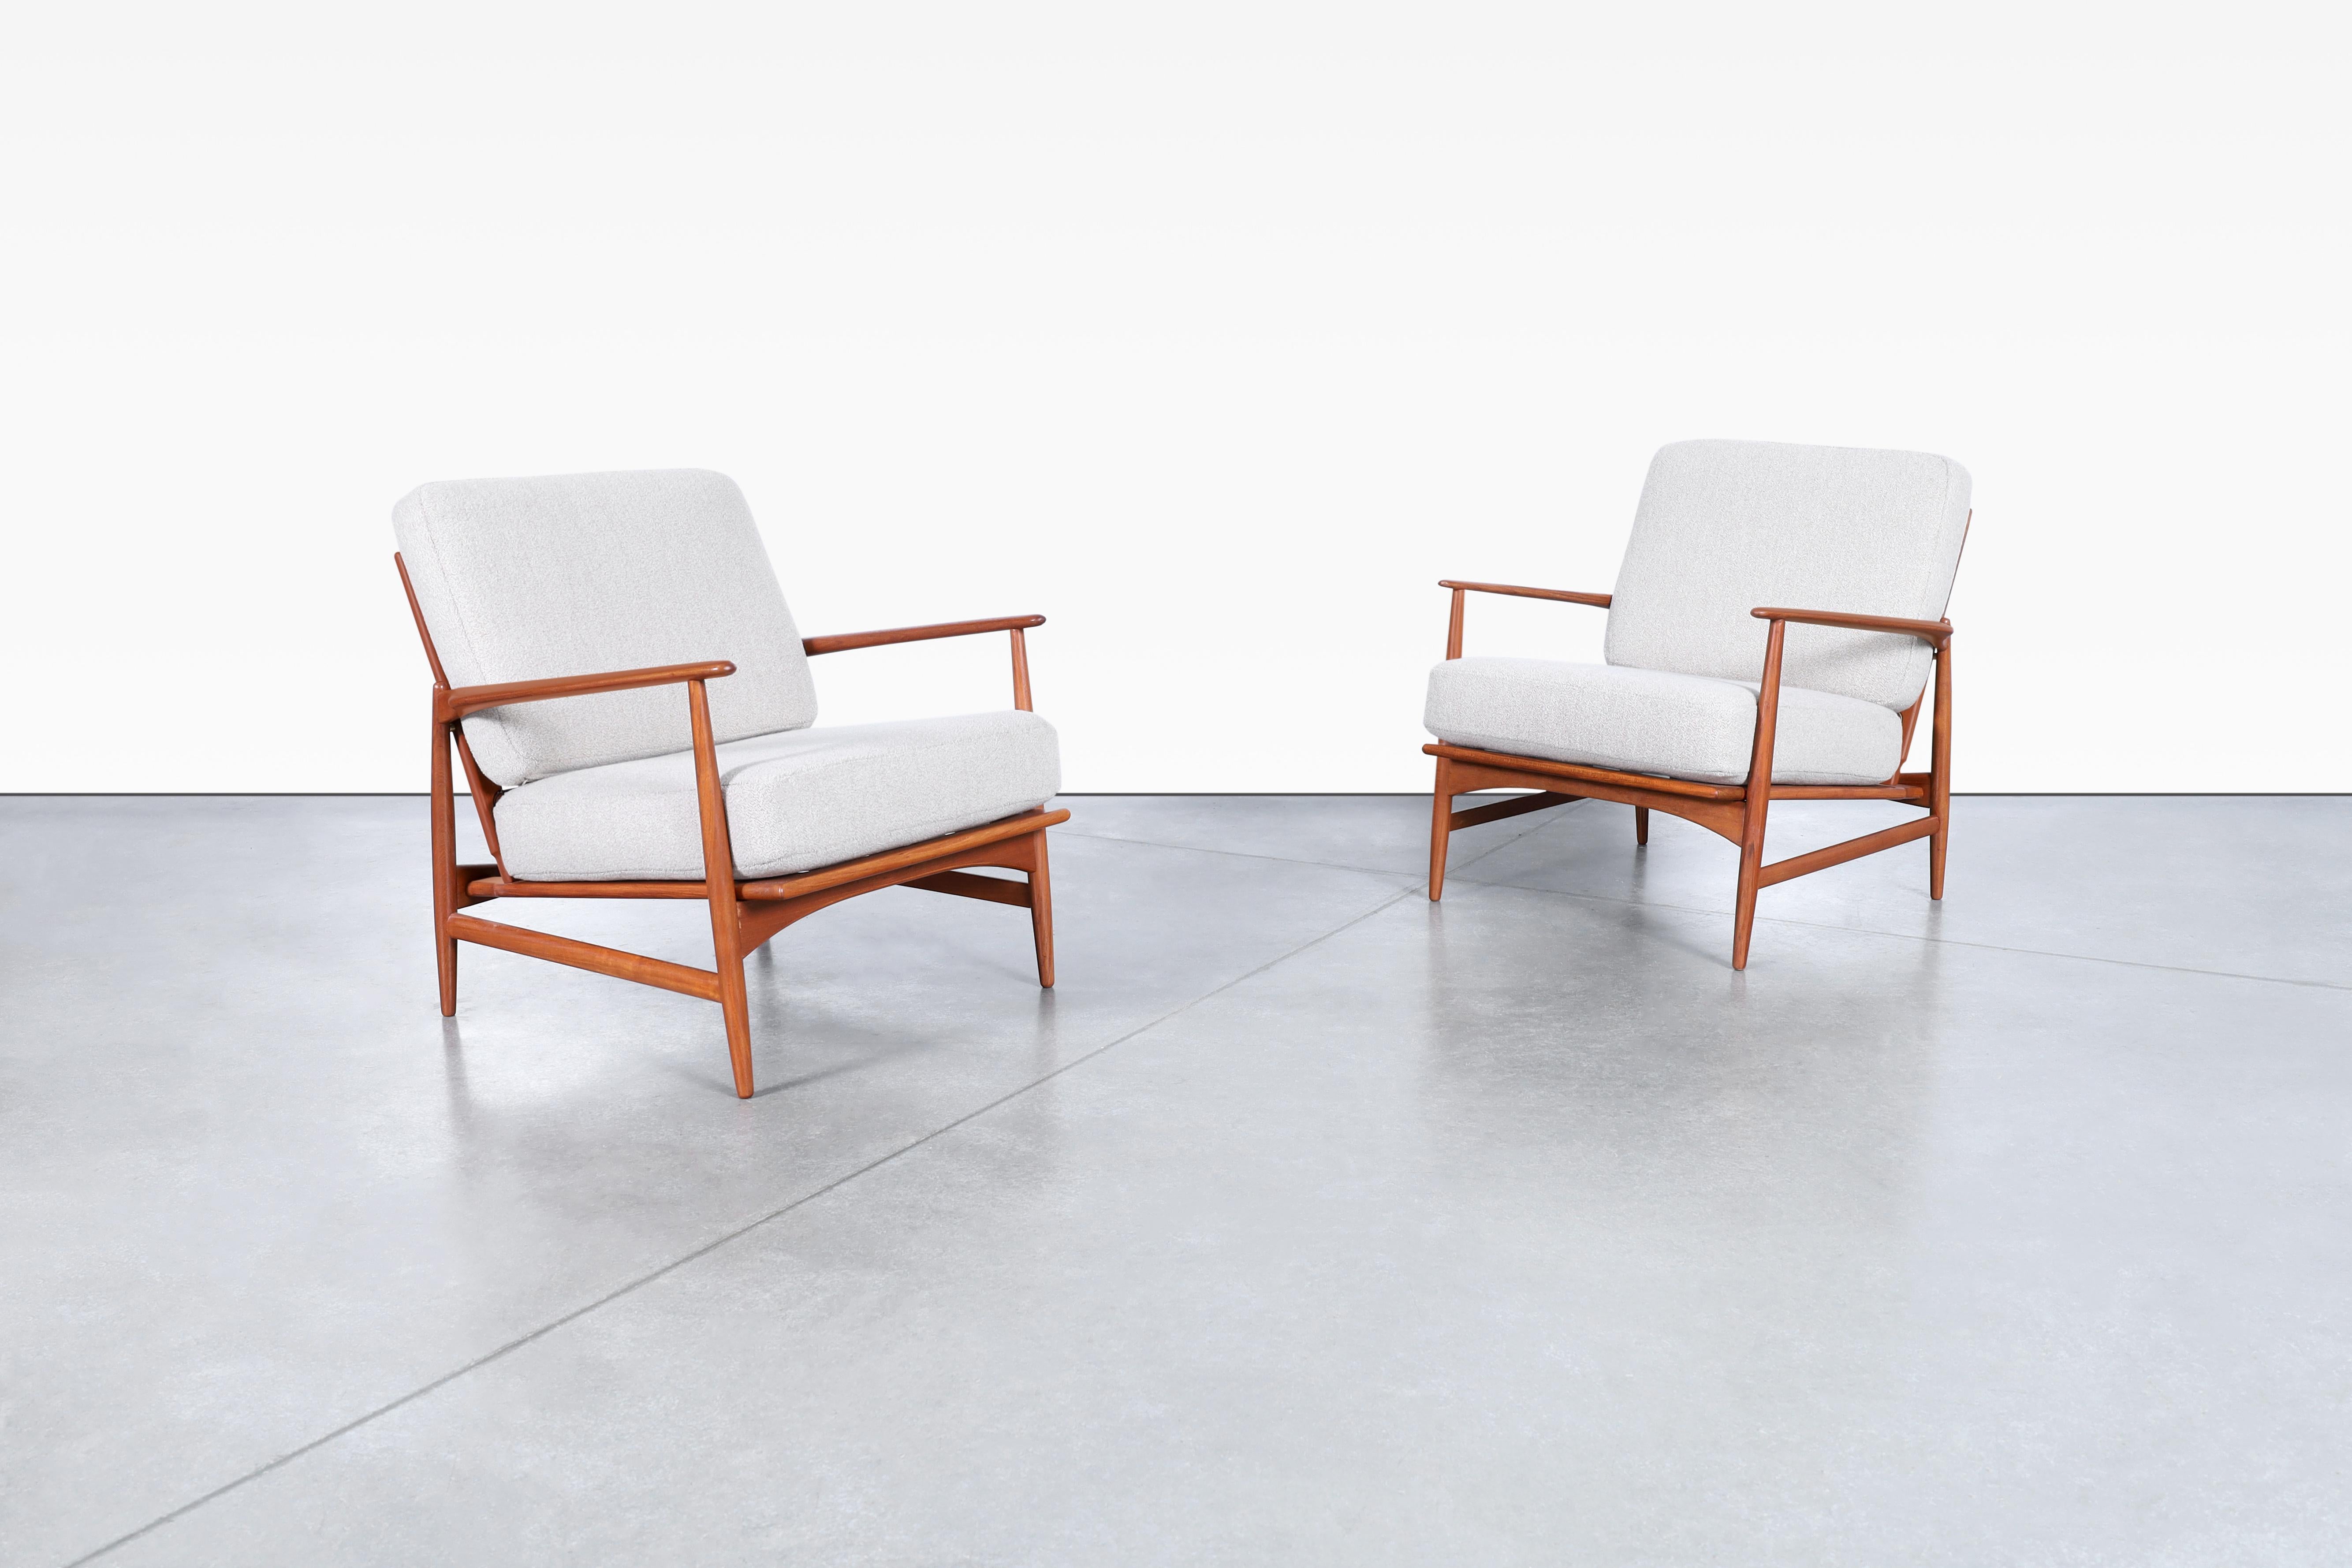 Amazing Danish modern teak lounge chairs designed by Ib Kofod Larsen for Selig in Denmark, circa 1960s. These chairs are truly stunning! The solid handcrafted teak frame is expertly crafted to create a sleek profile that will elevate any room. The